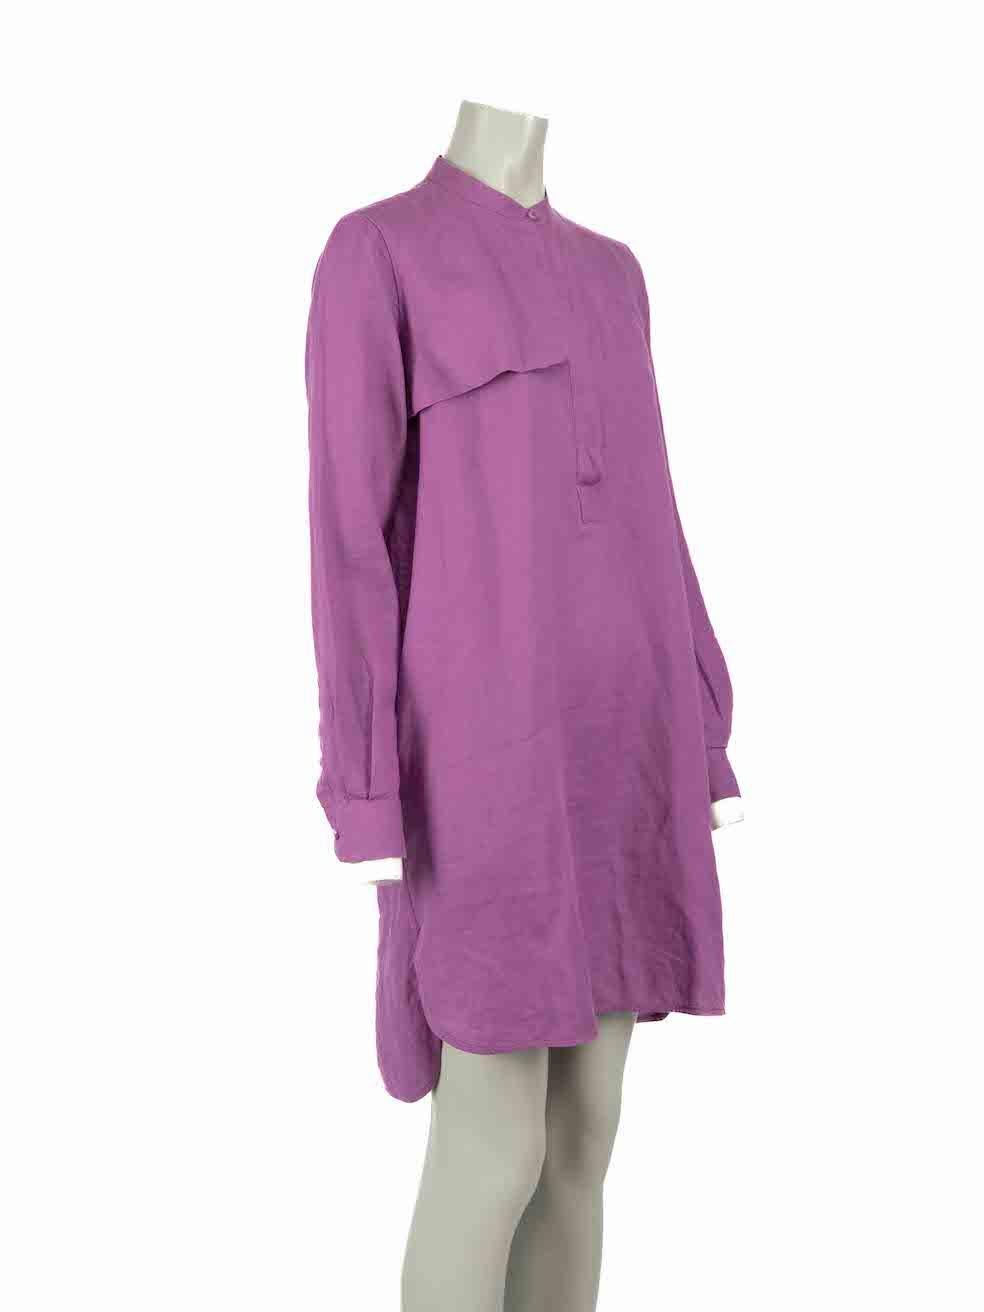 CONDITION is Very good. Minimal wear to dress is evident. Minimal wear to button attachment with loose threads at centre front, seams where sides meet the hem are also very lightly frayed on this used Loro Piana designer resale item.
